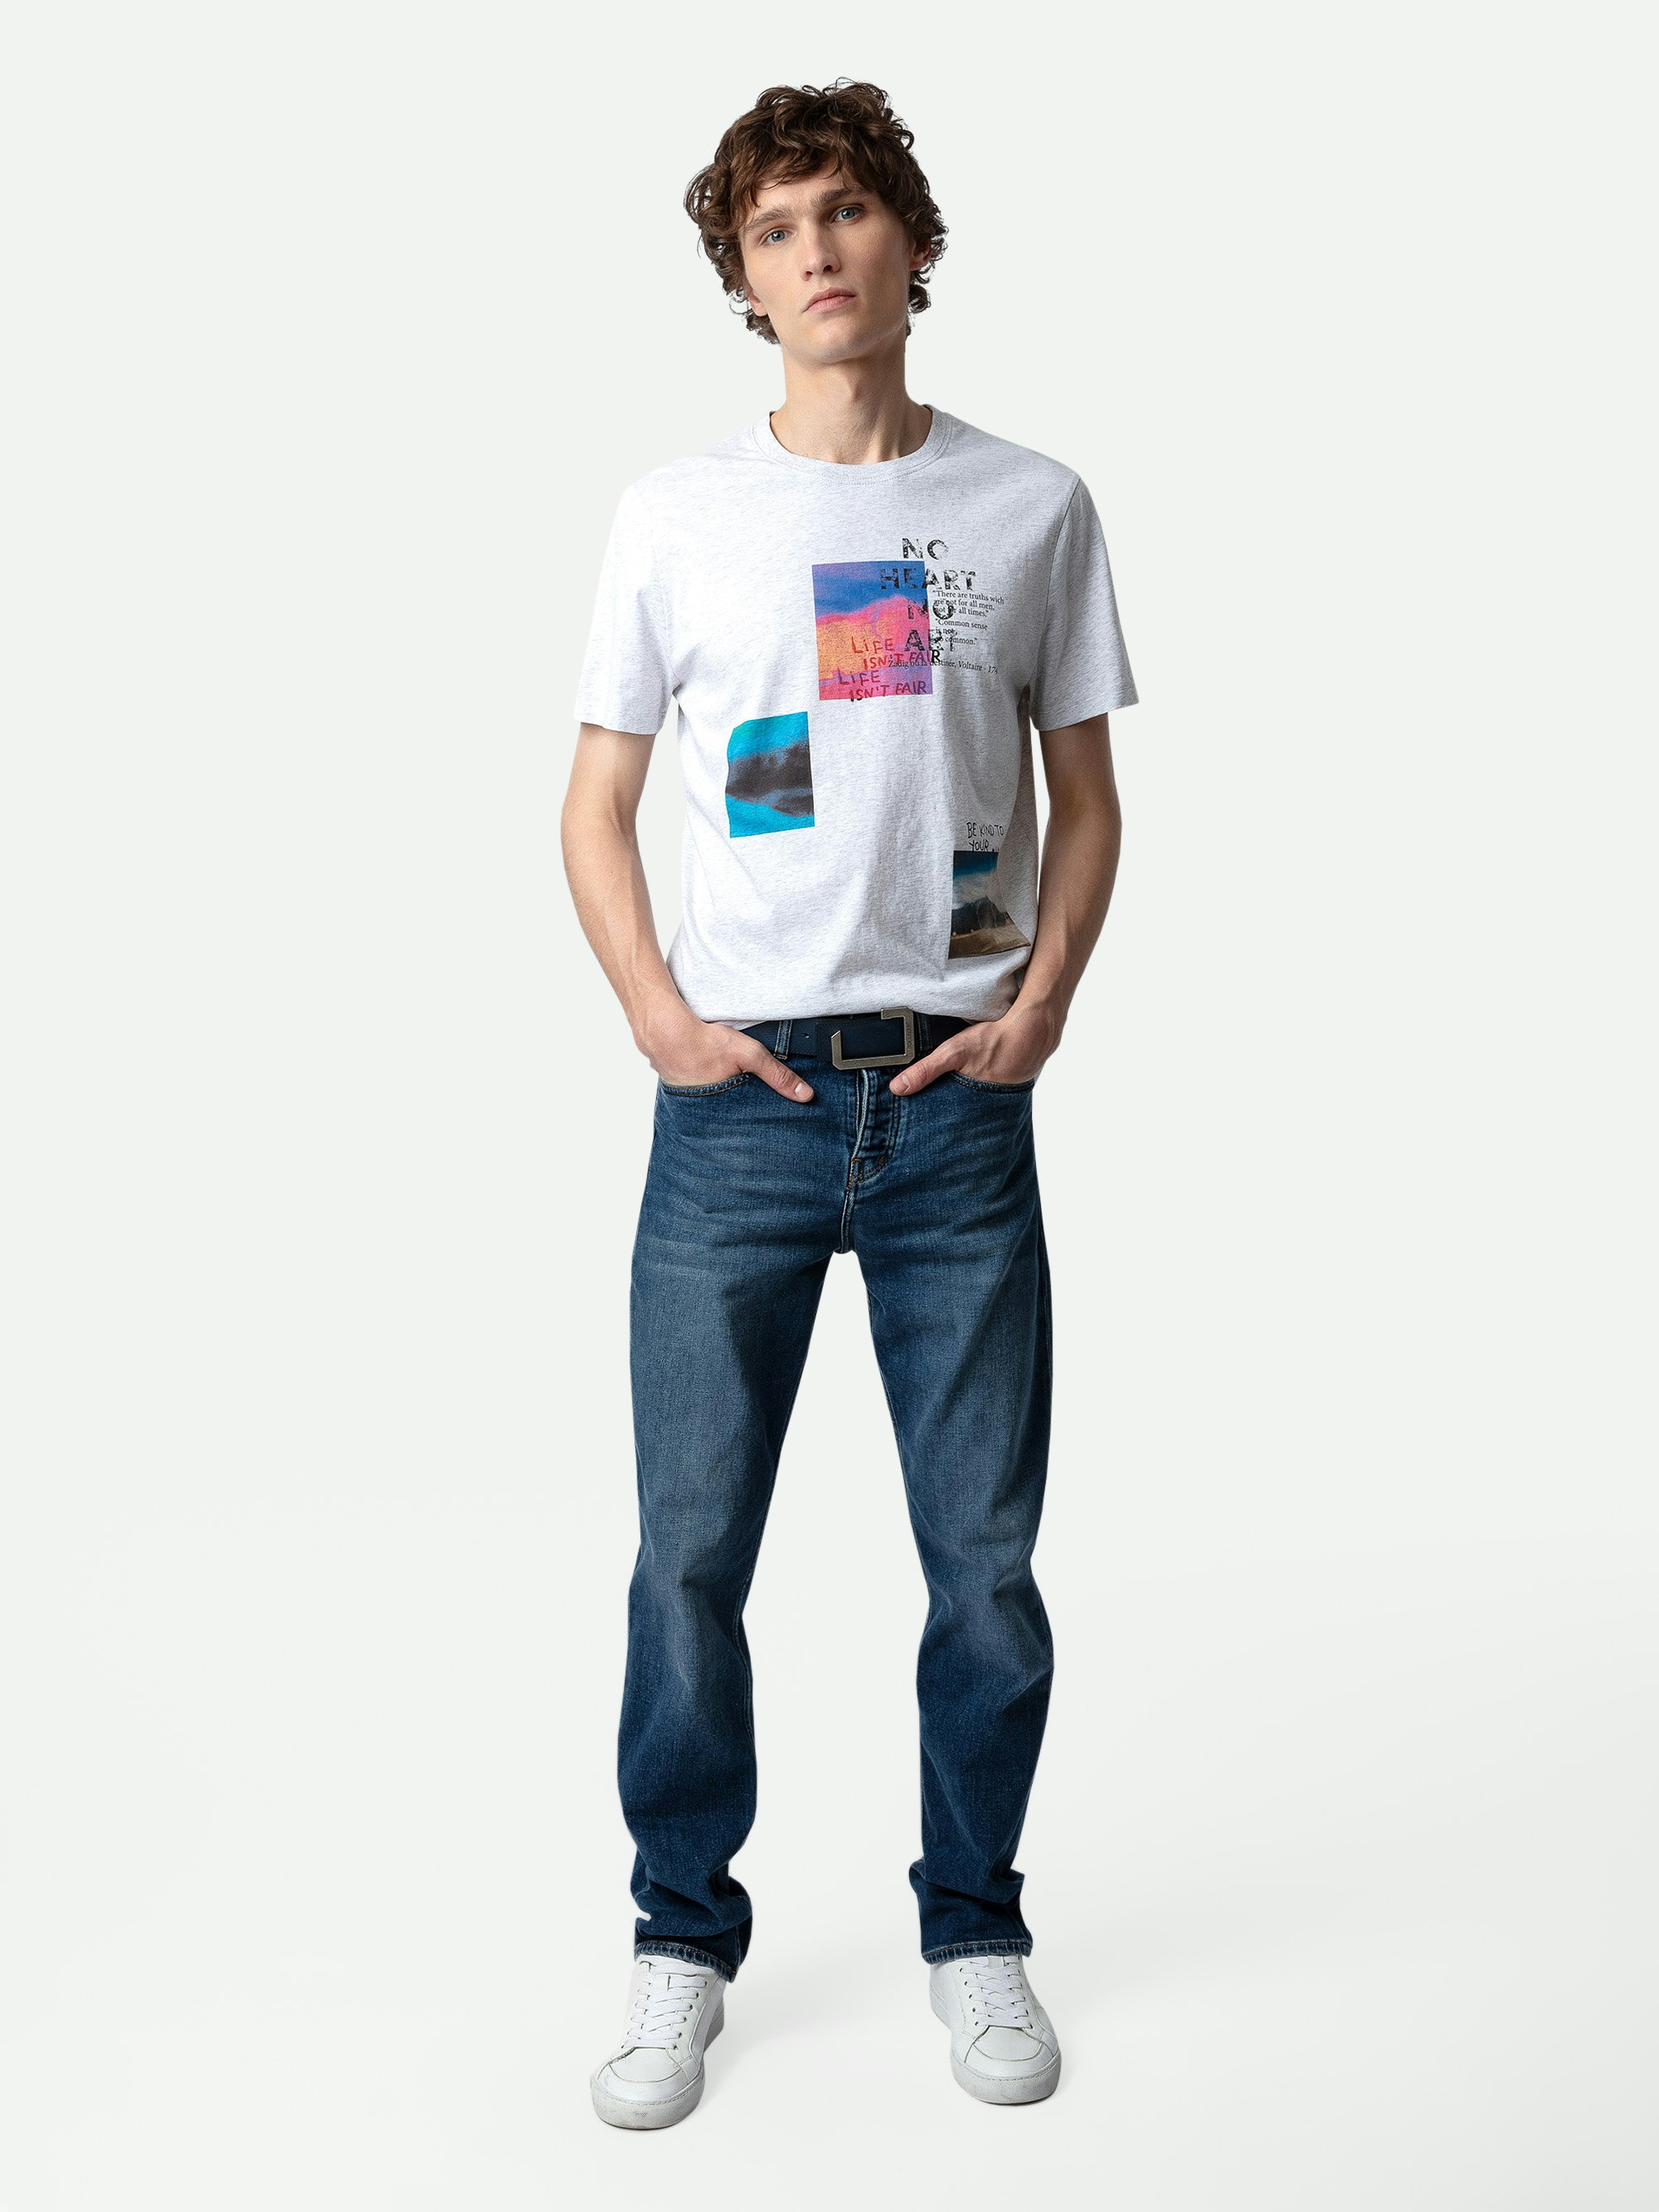 Ted Photoprint T-shirt - Light grey marl cotton round-neck T-shirt with Multiposter photoprint.